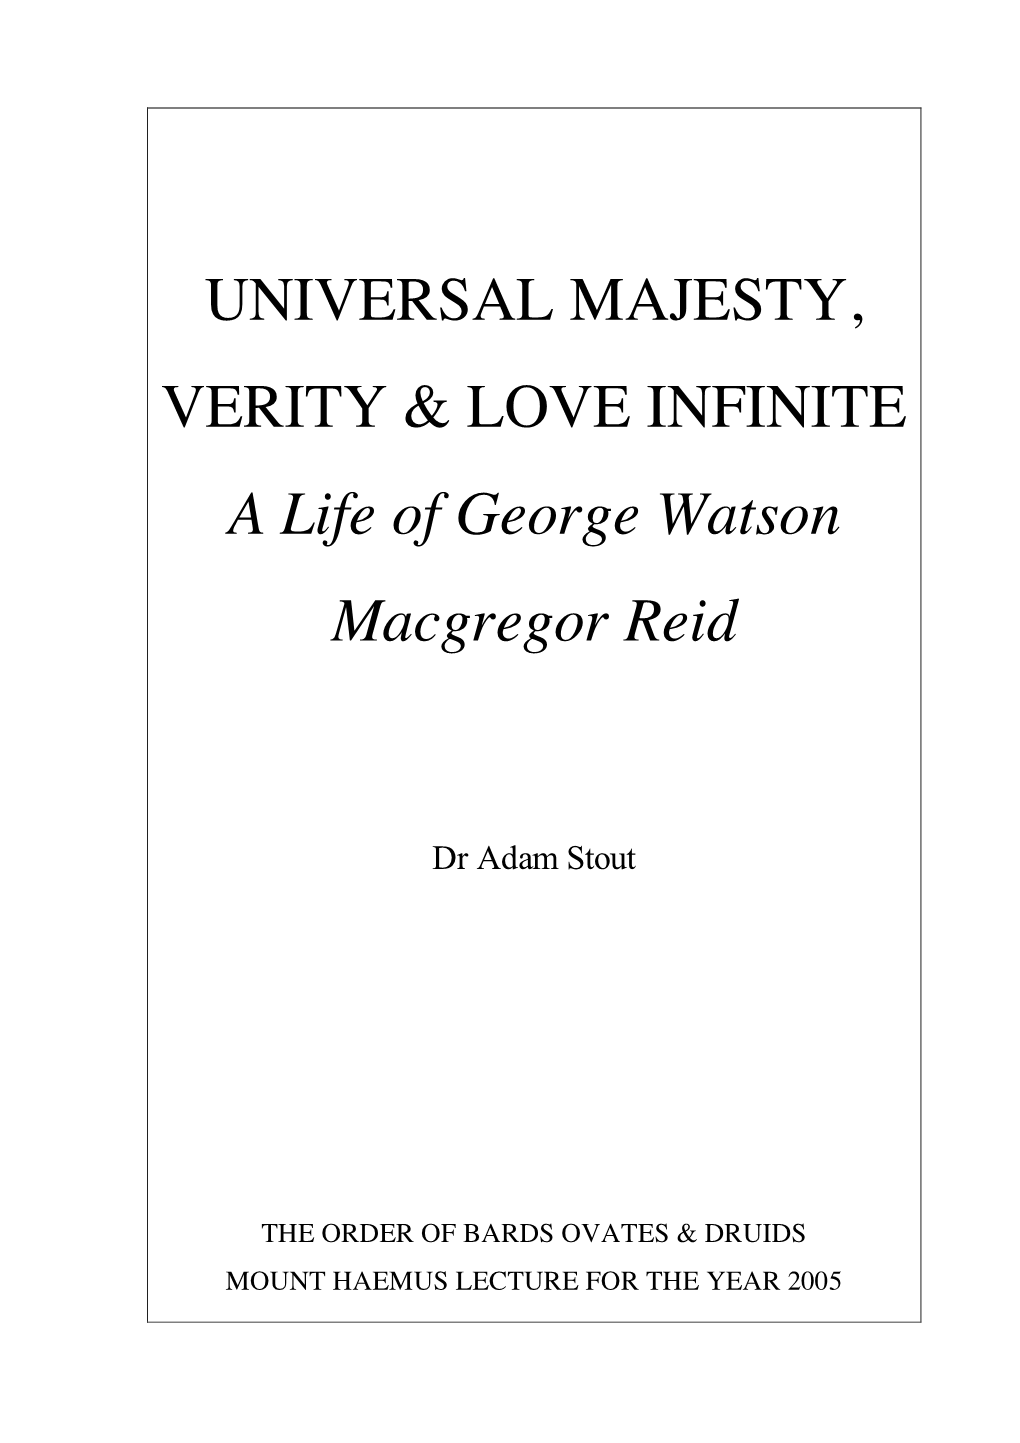 UNIVERSAL MAJESTY, VERITY & LOVE INFINITE a Life of George